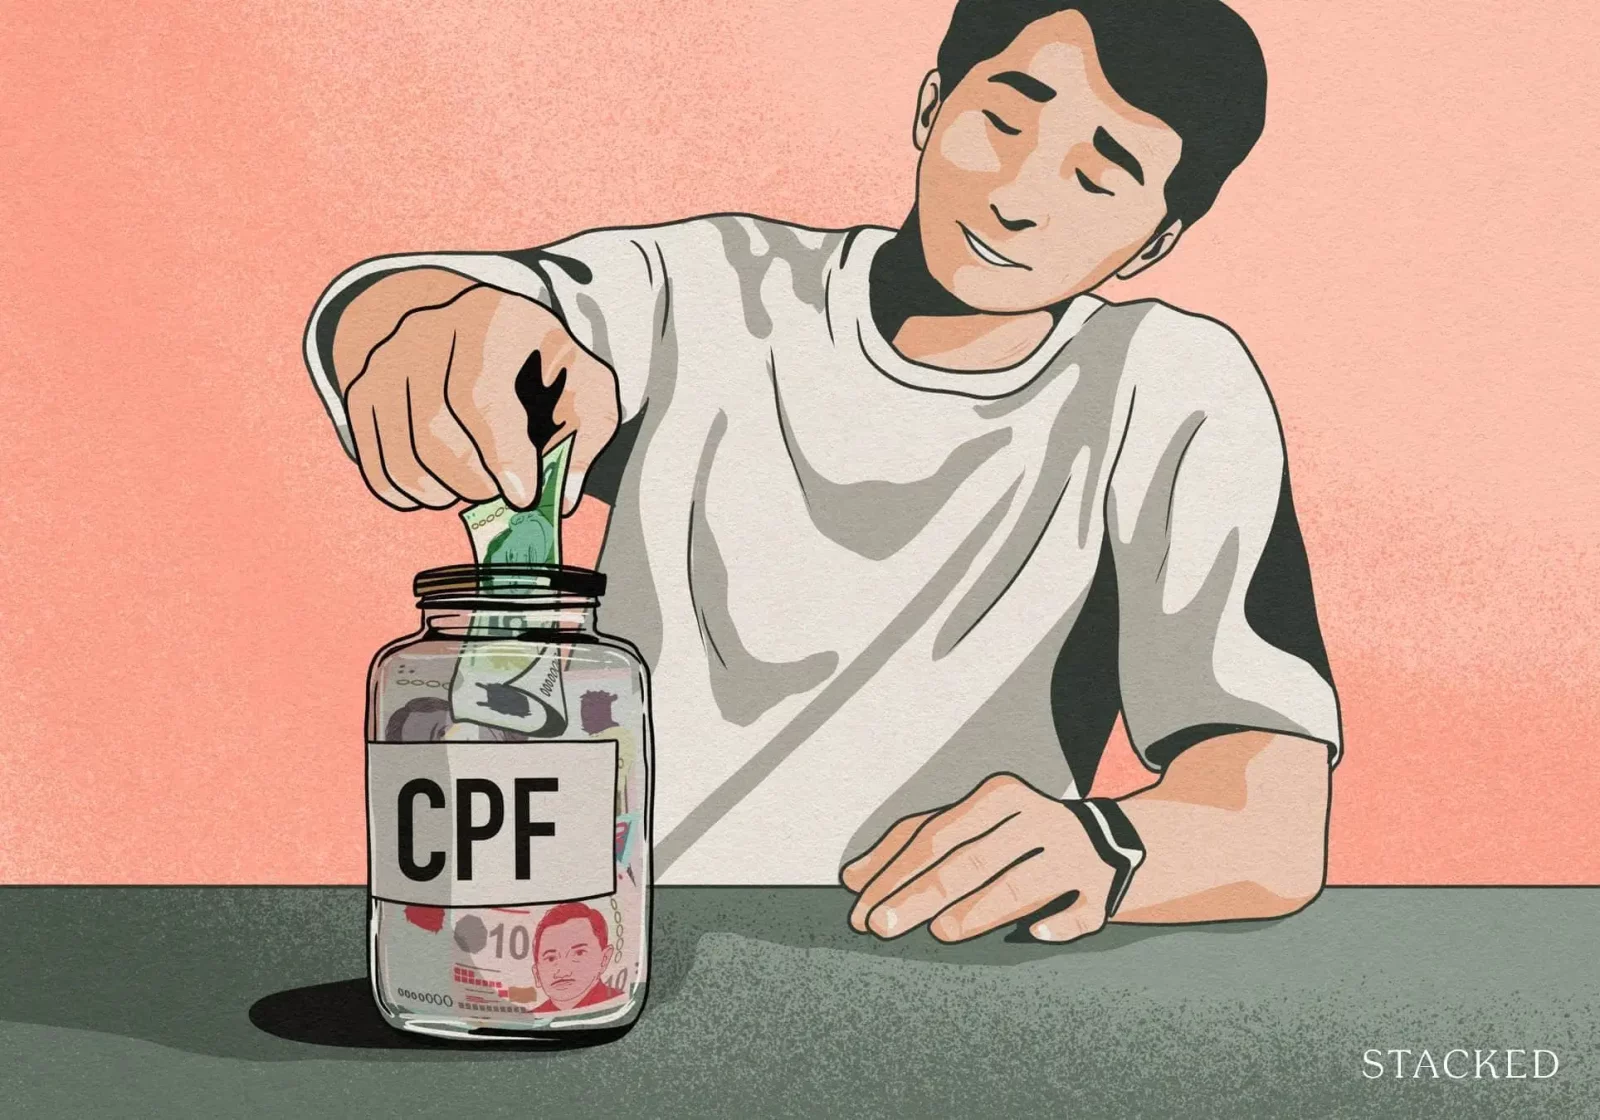 cpf payments